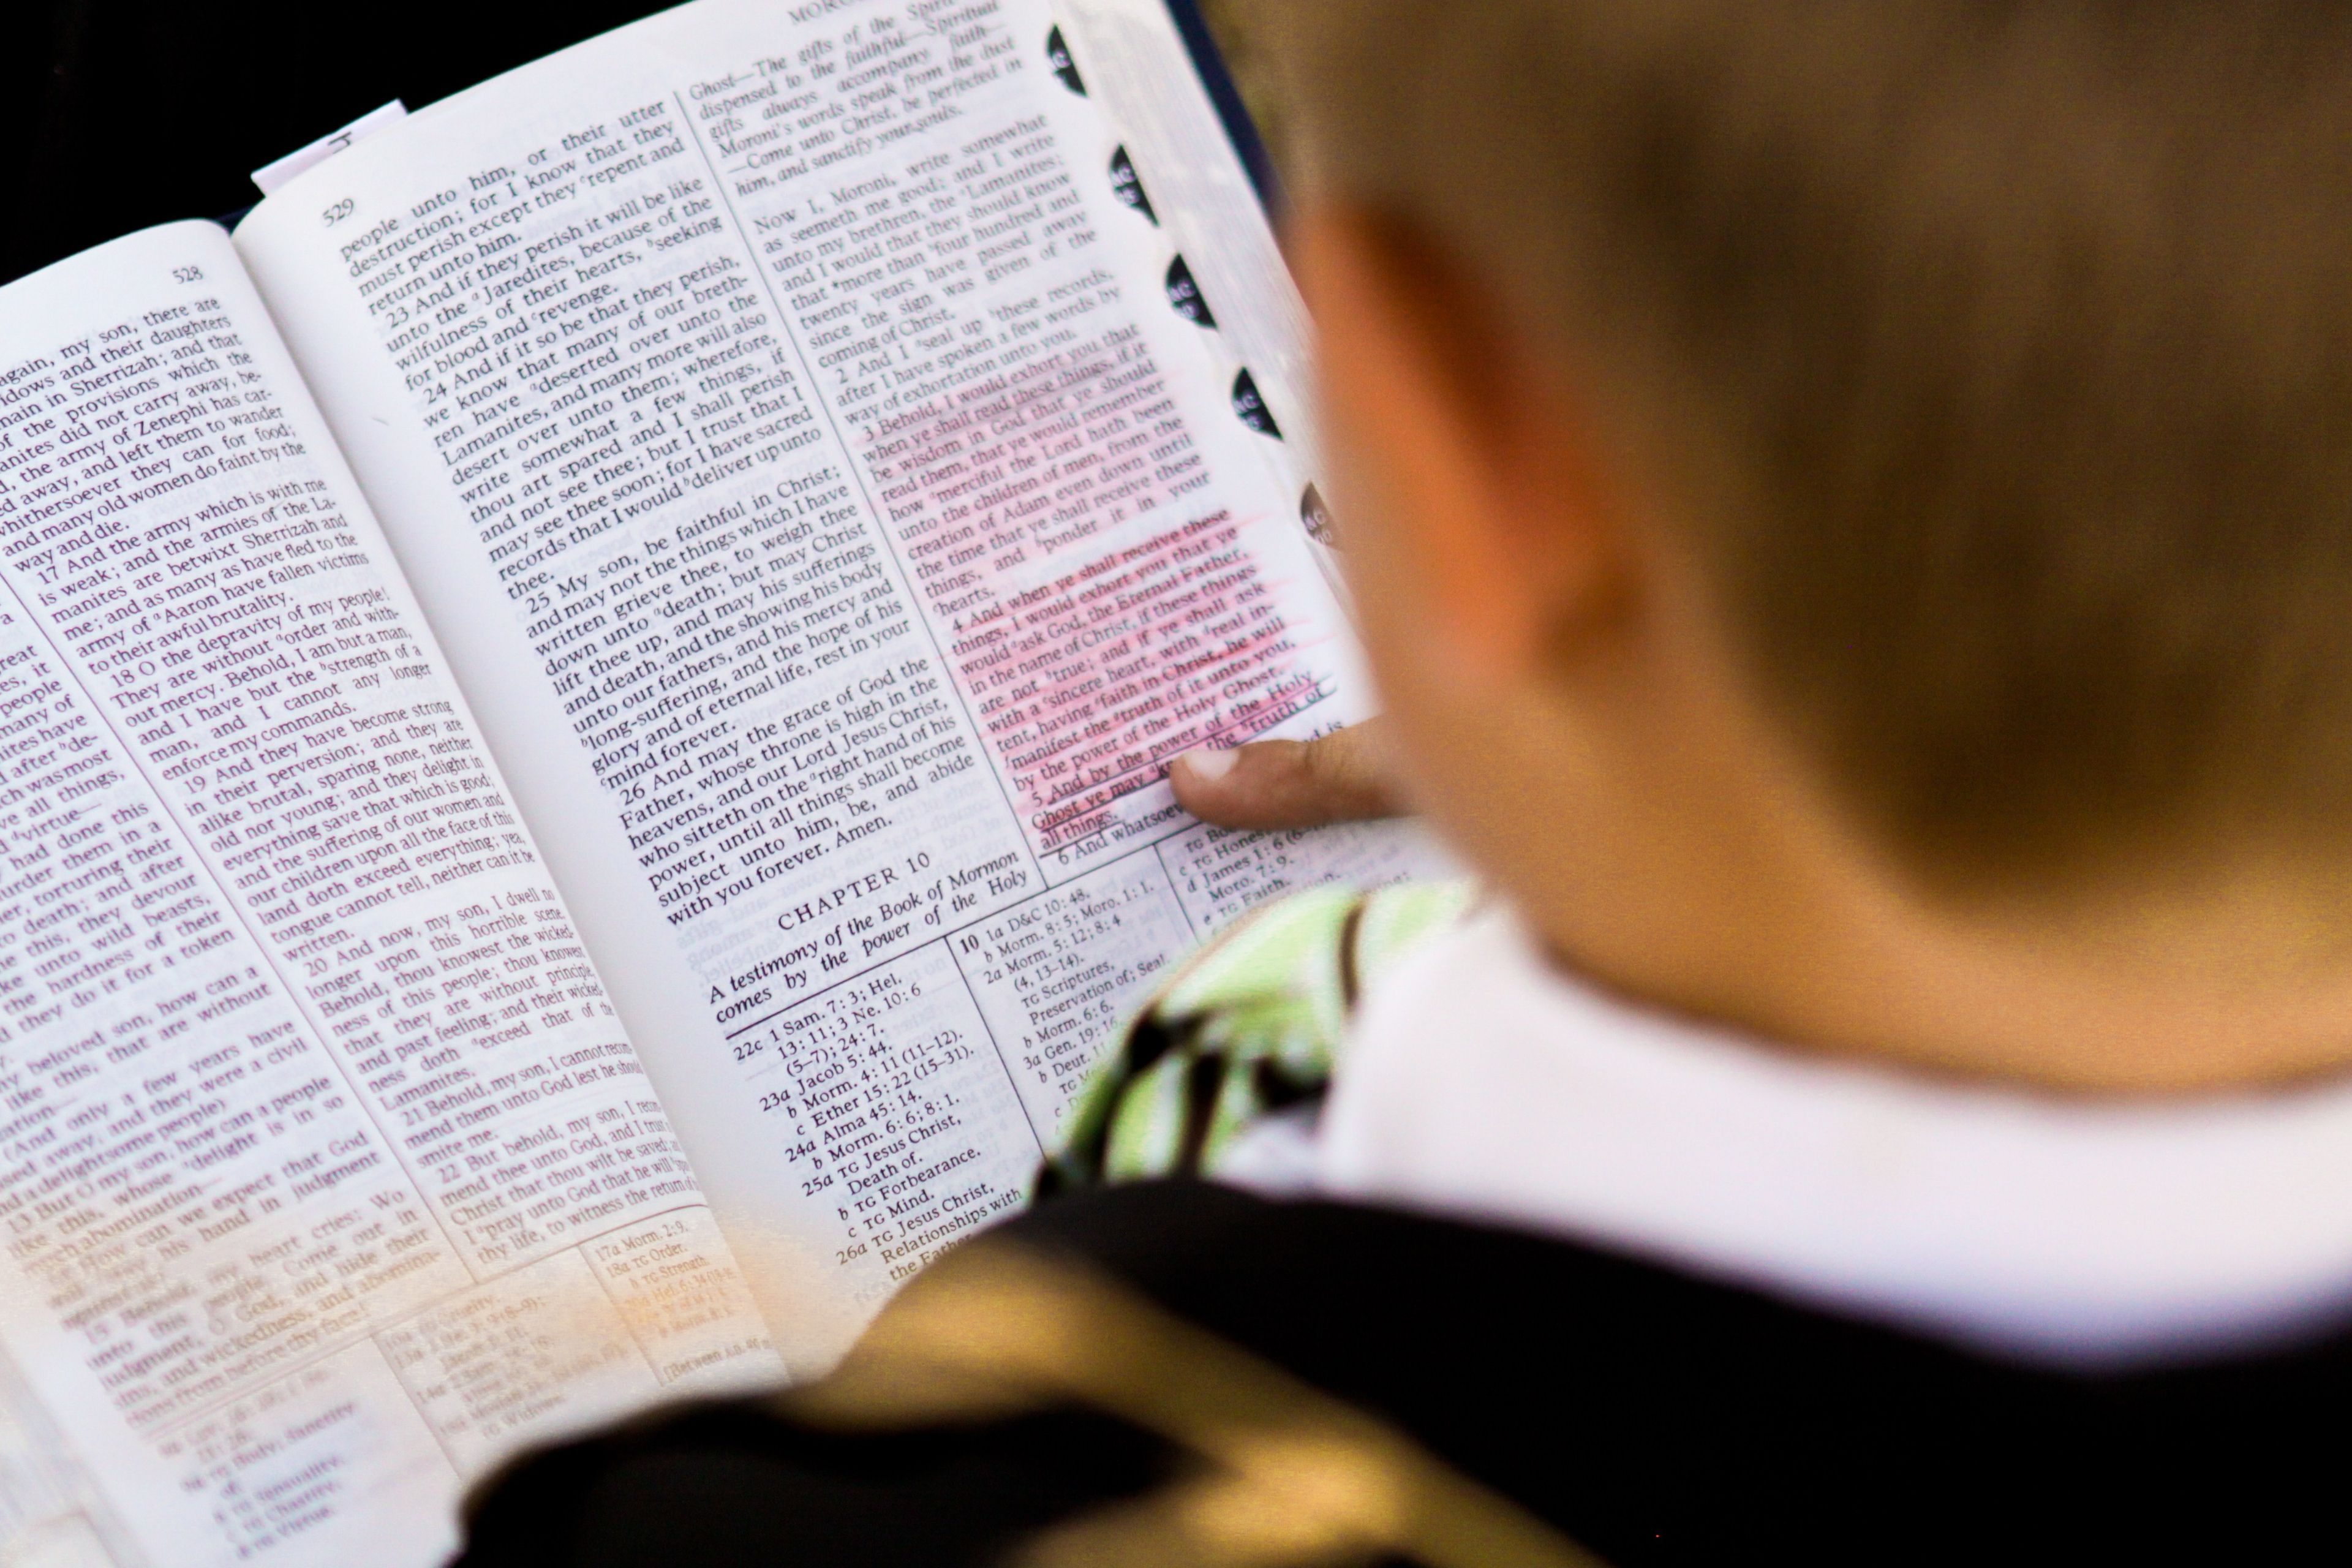 A boy holding open a copy of the Book of Mormon to Moroni chapter 10.